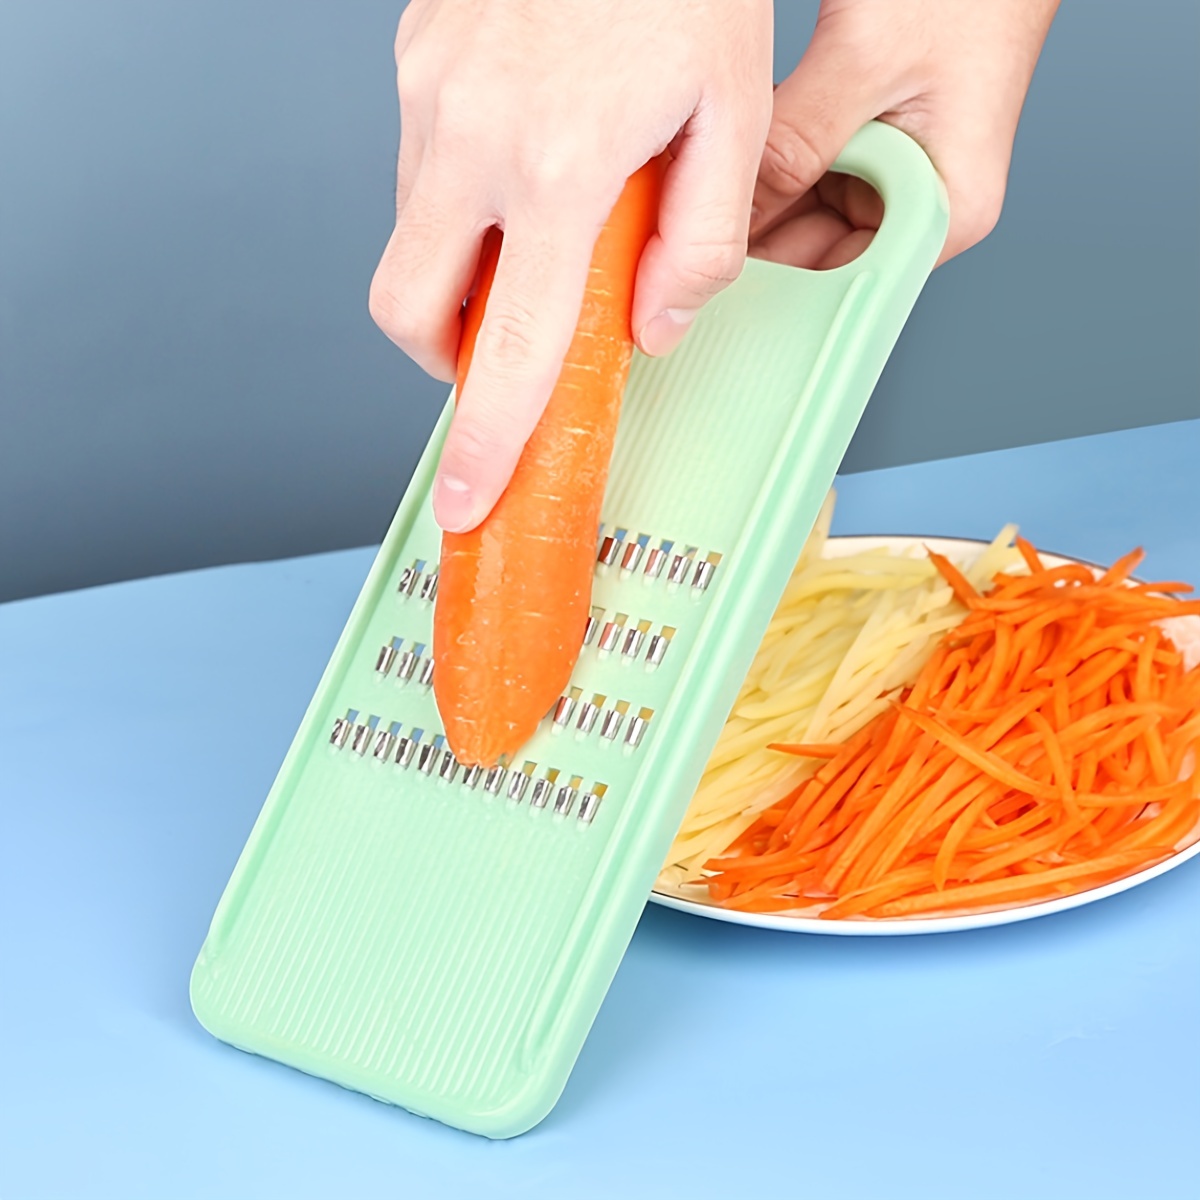 1Pcs handheld Plastic Multifunction Kitchen Peeler Grater Slicer Tool,for  Vegetable, Fruit,Cucumber,Potato,Carrots,Cheese,Chef Gadgets Tools